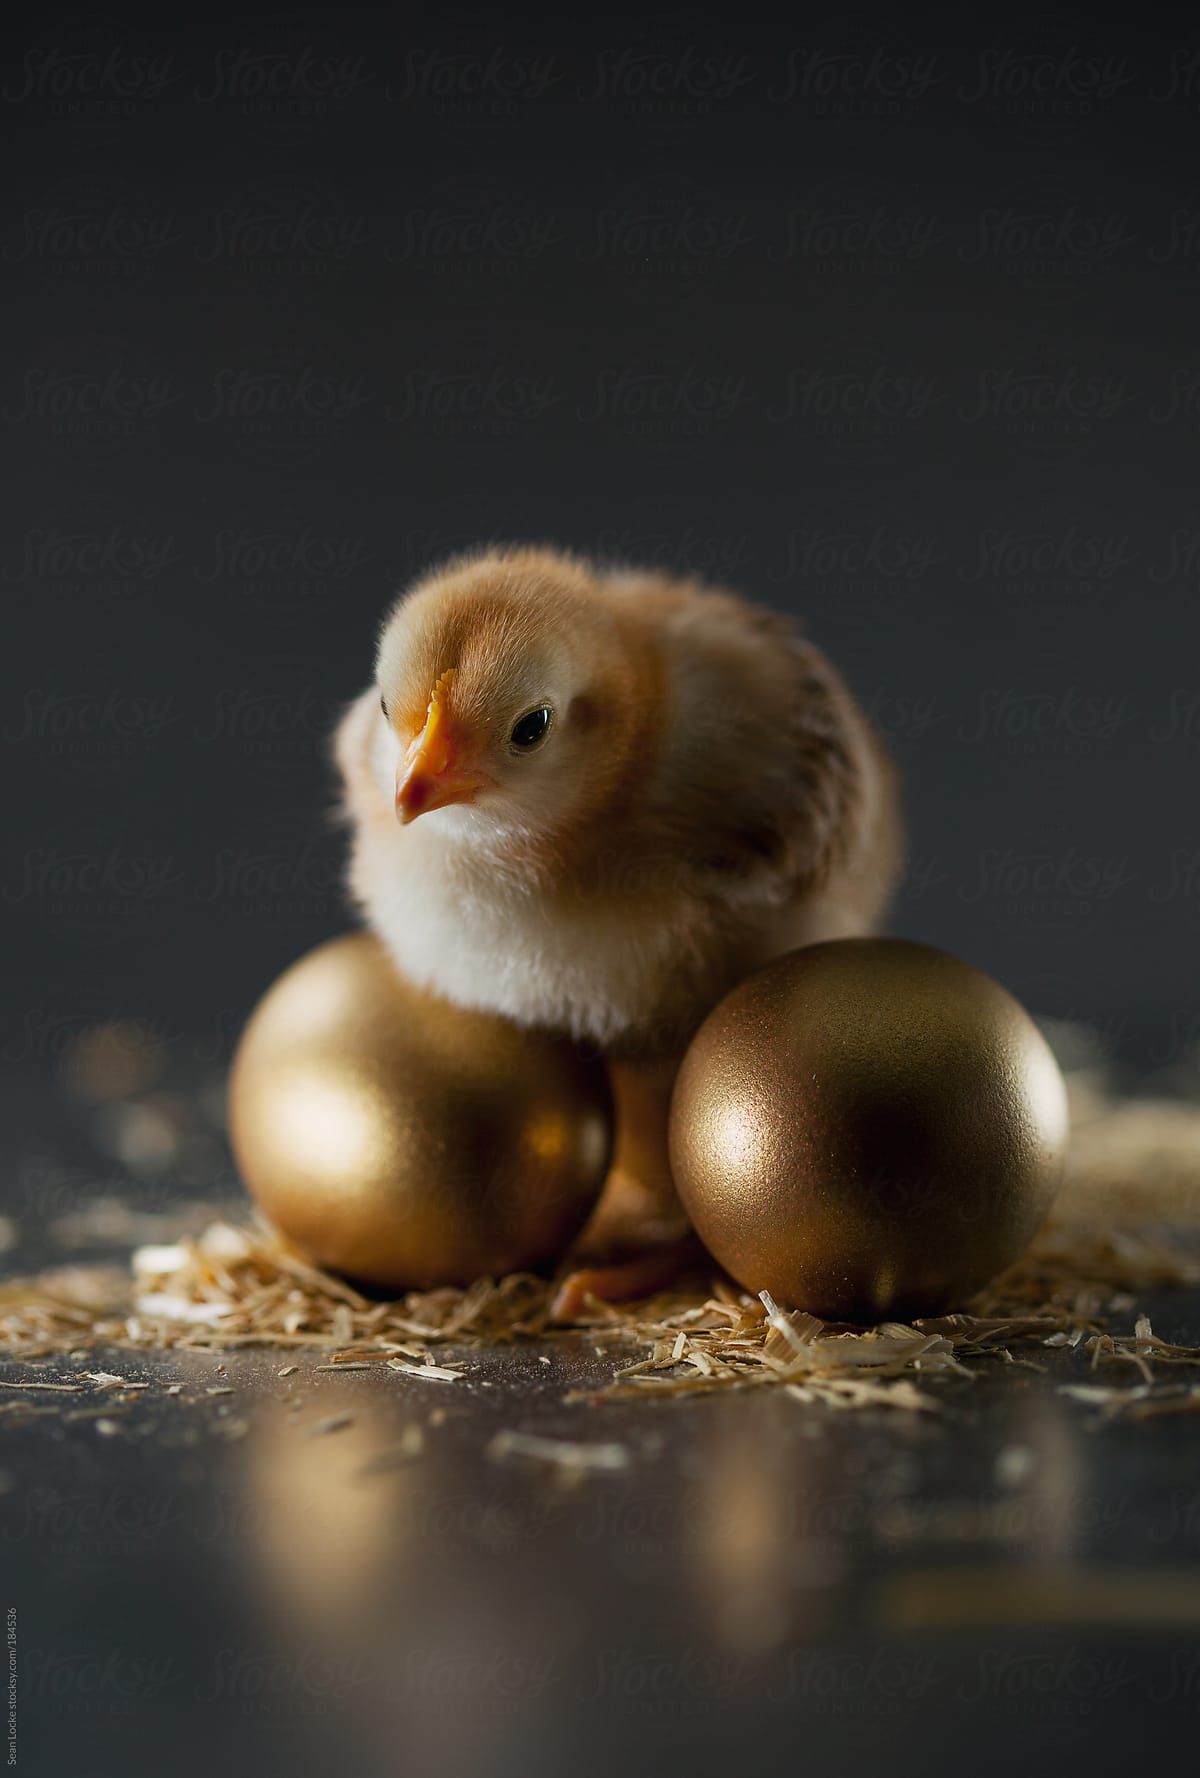 Chicks: Chick Sits On Golden Eggs Concept